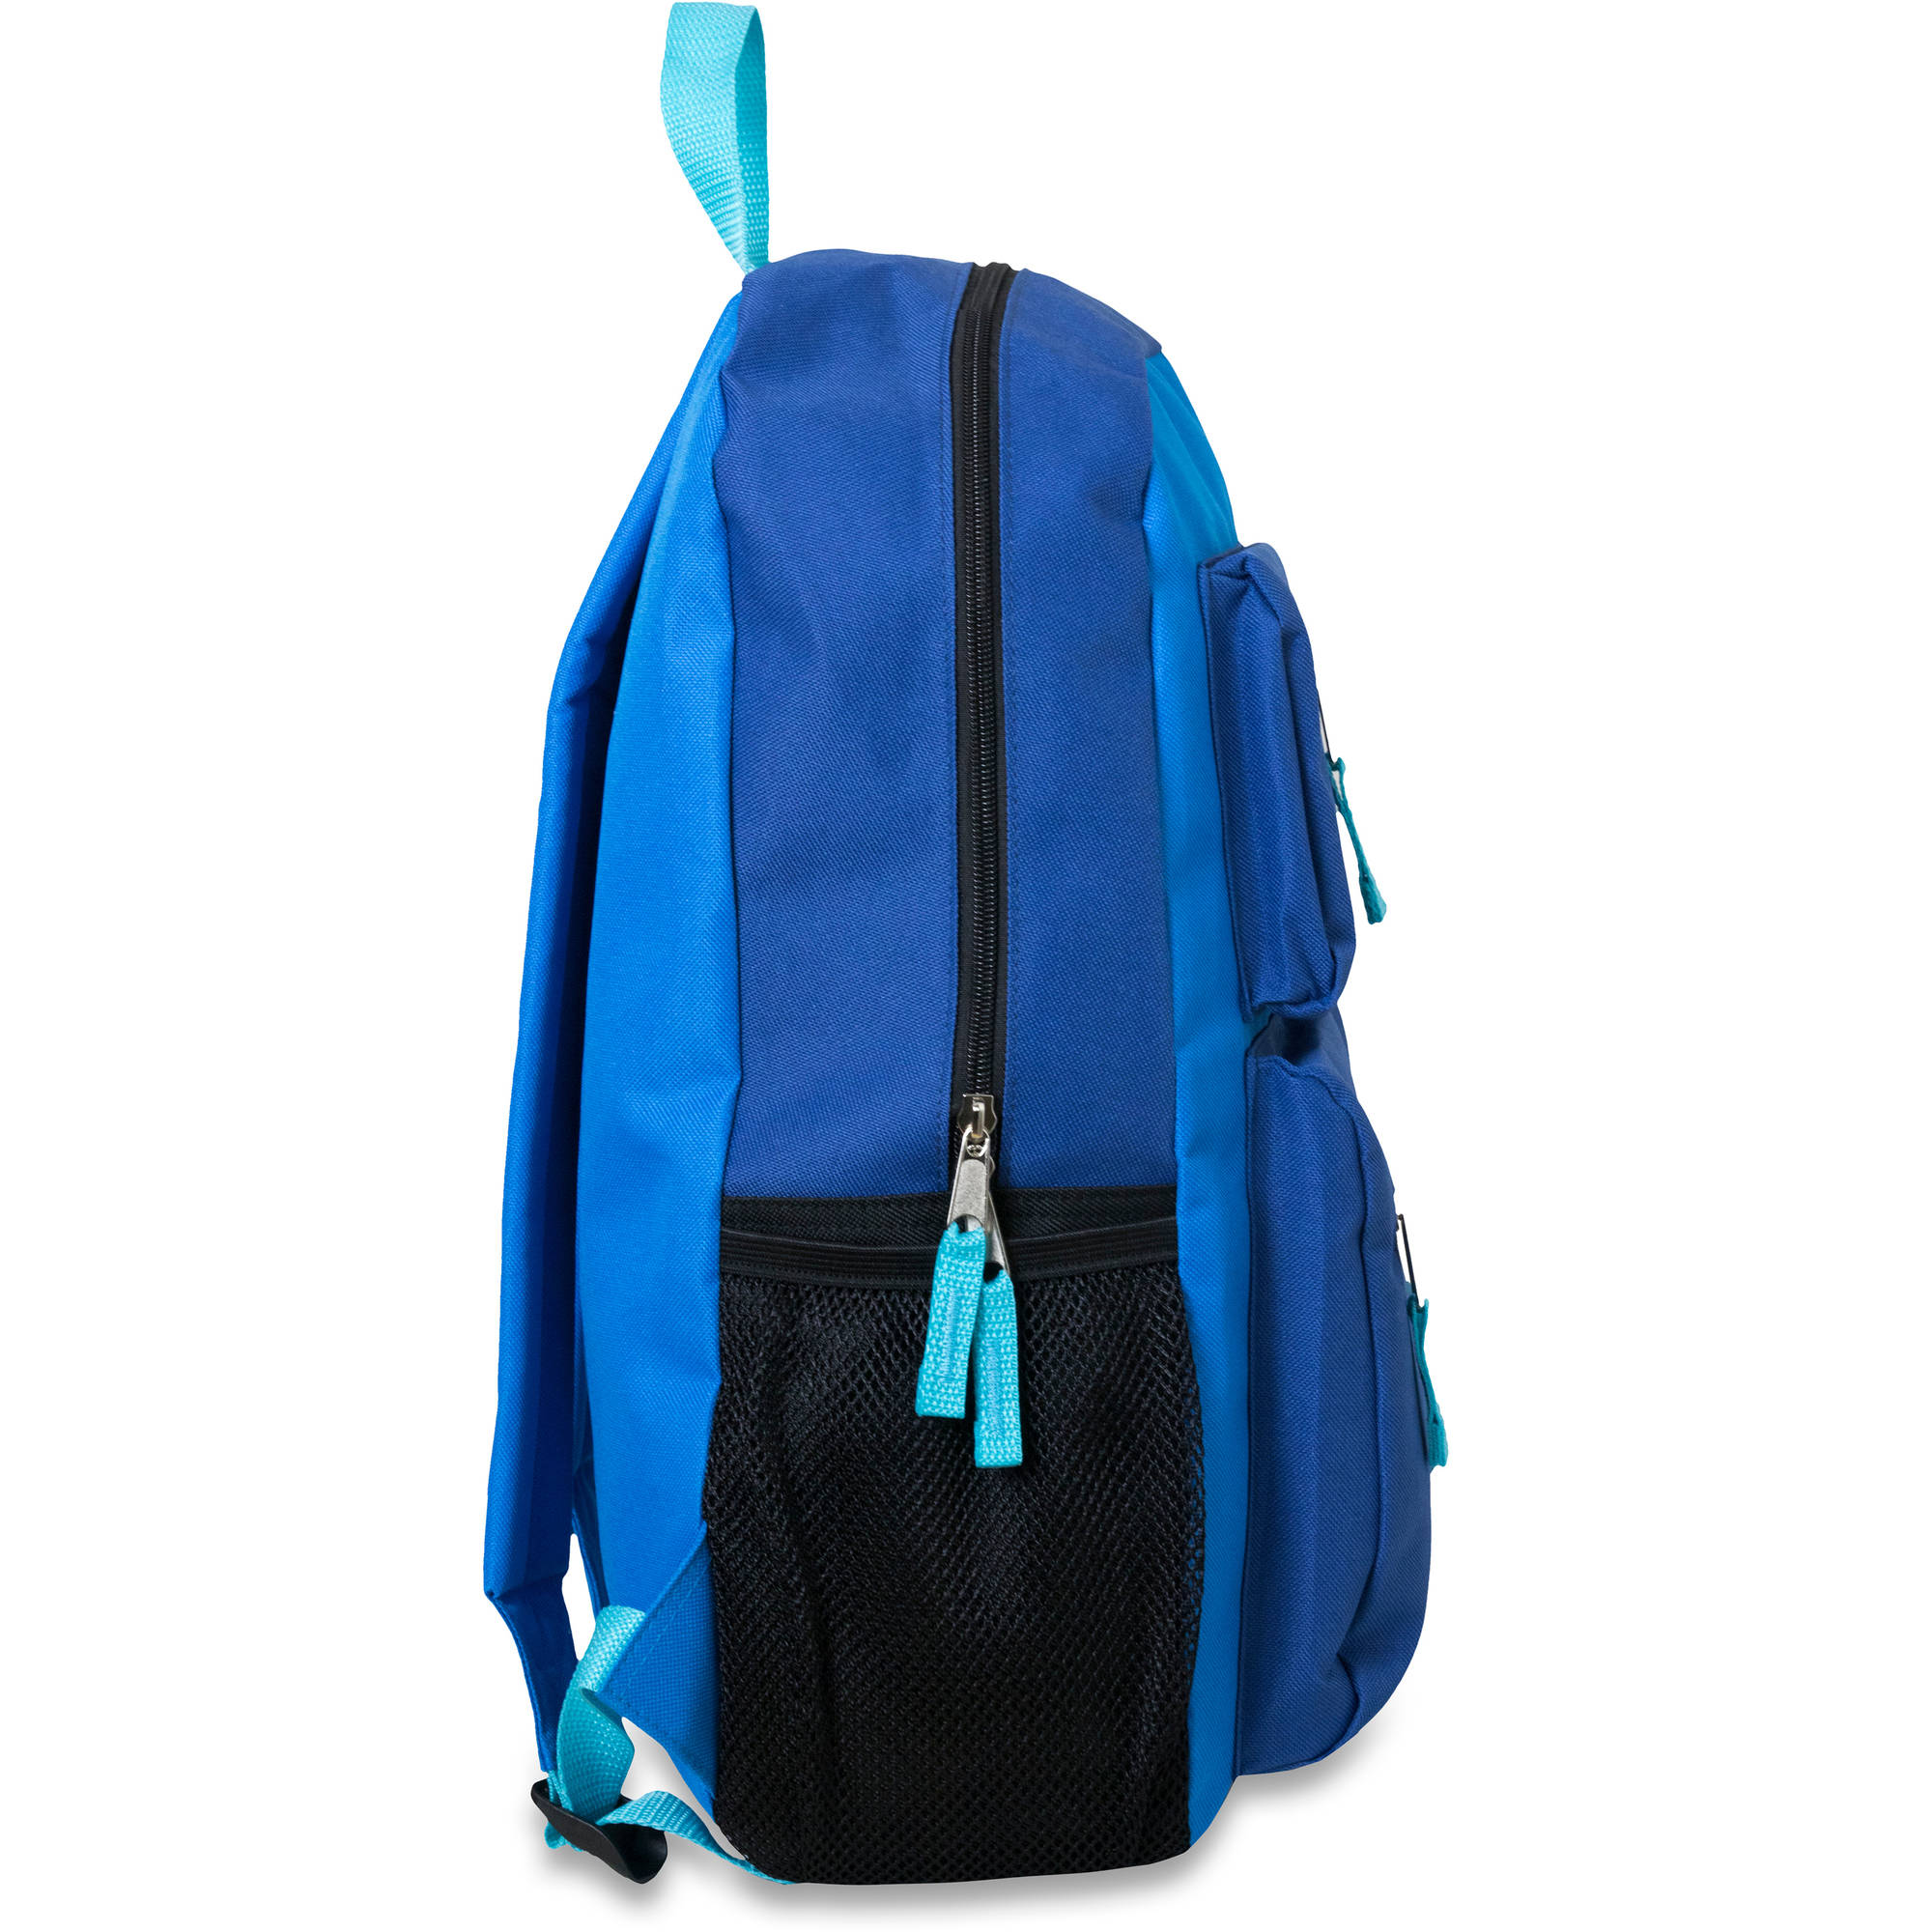 18 Inch Double Pocket Backpack - image 3 of 3